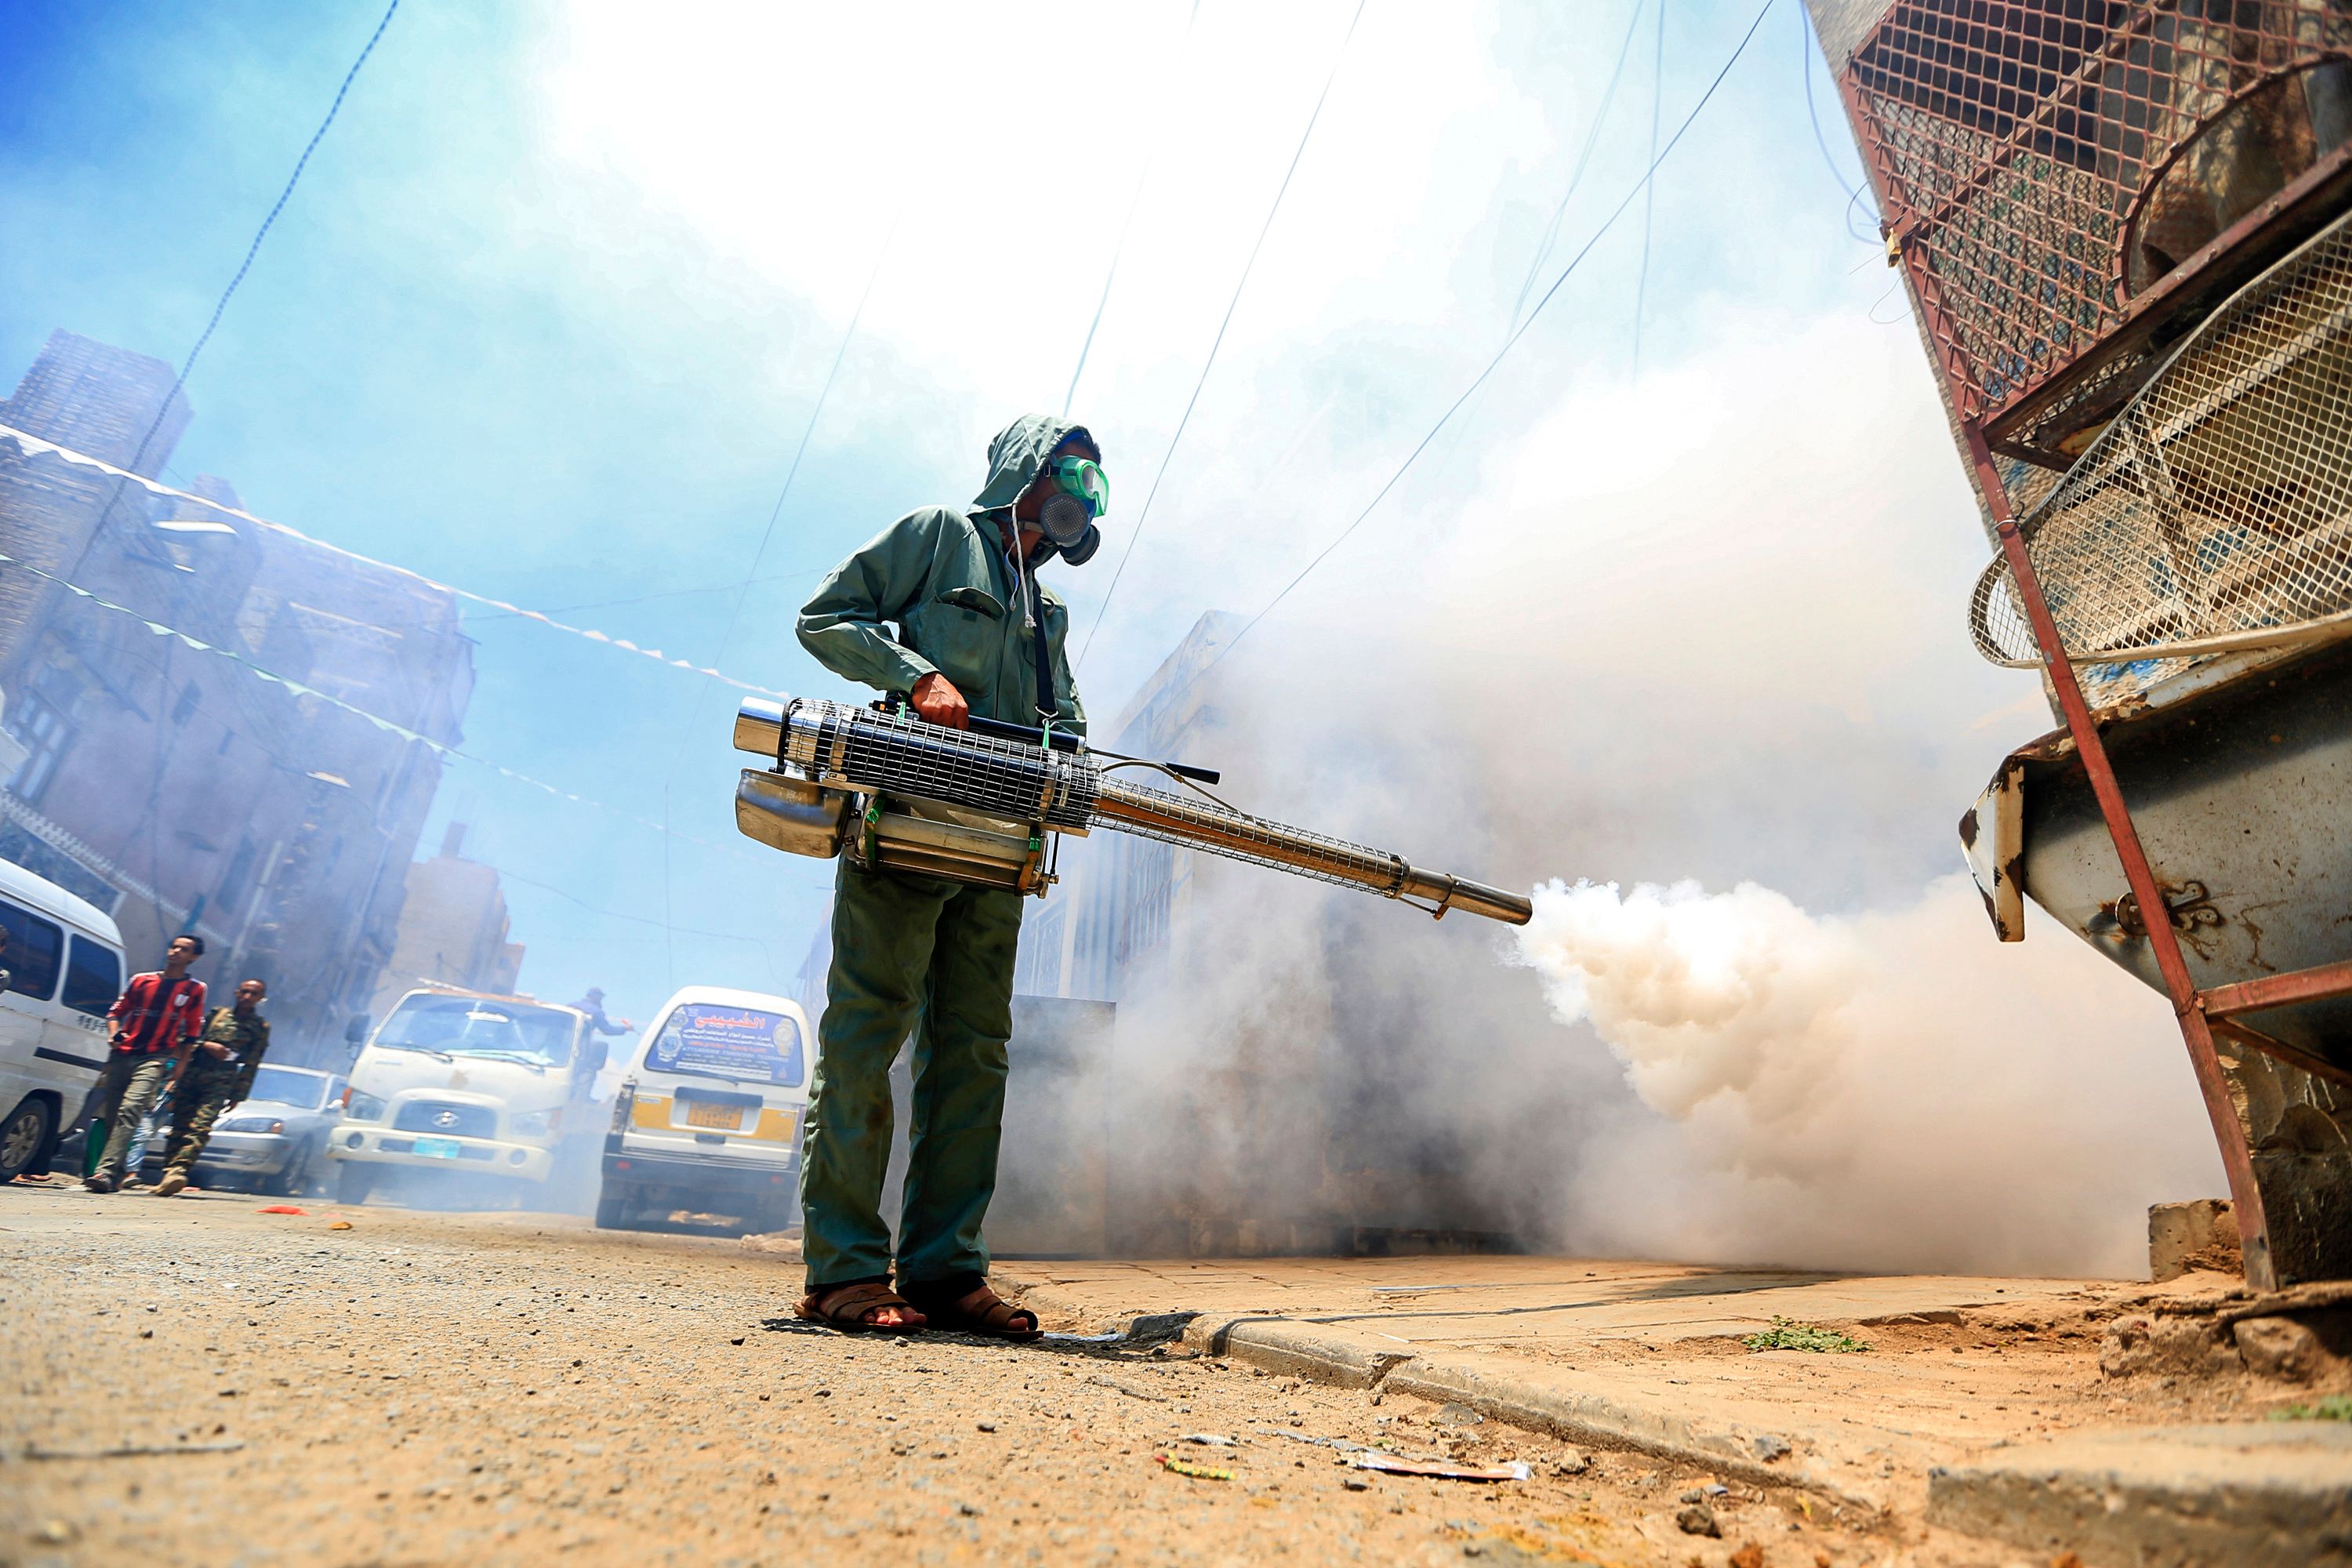 TOPSHOT - A government worker that is part of a combined taskforce tackling COVID-19 coronavirus fumigates a neighbourhood as part of safety precautions, in Yemen's capital Sanaa on March 23, 2020. (Photo by Mohammed HUWAIS / AFP)